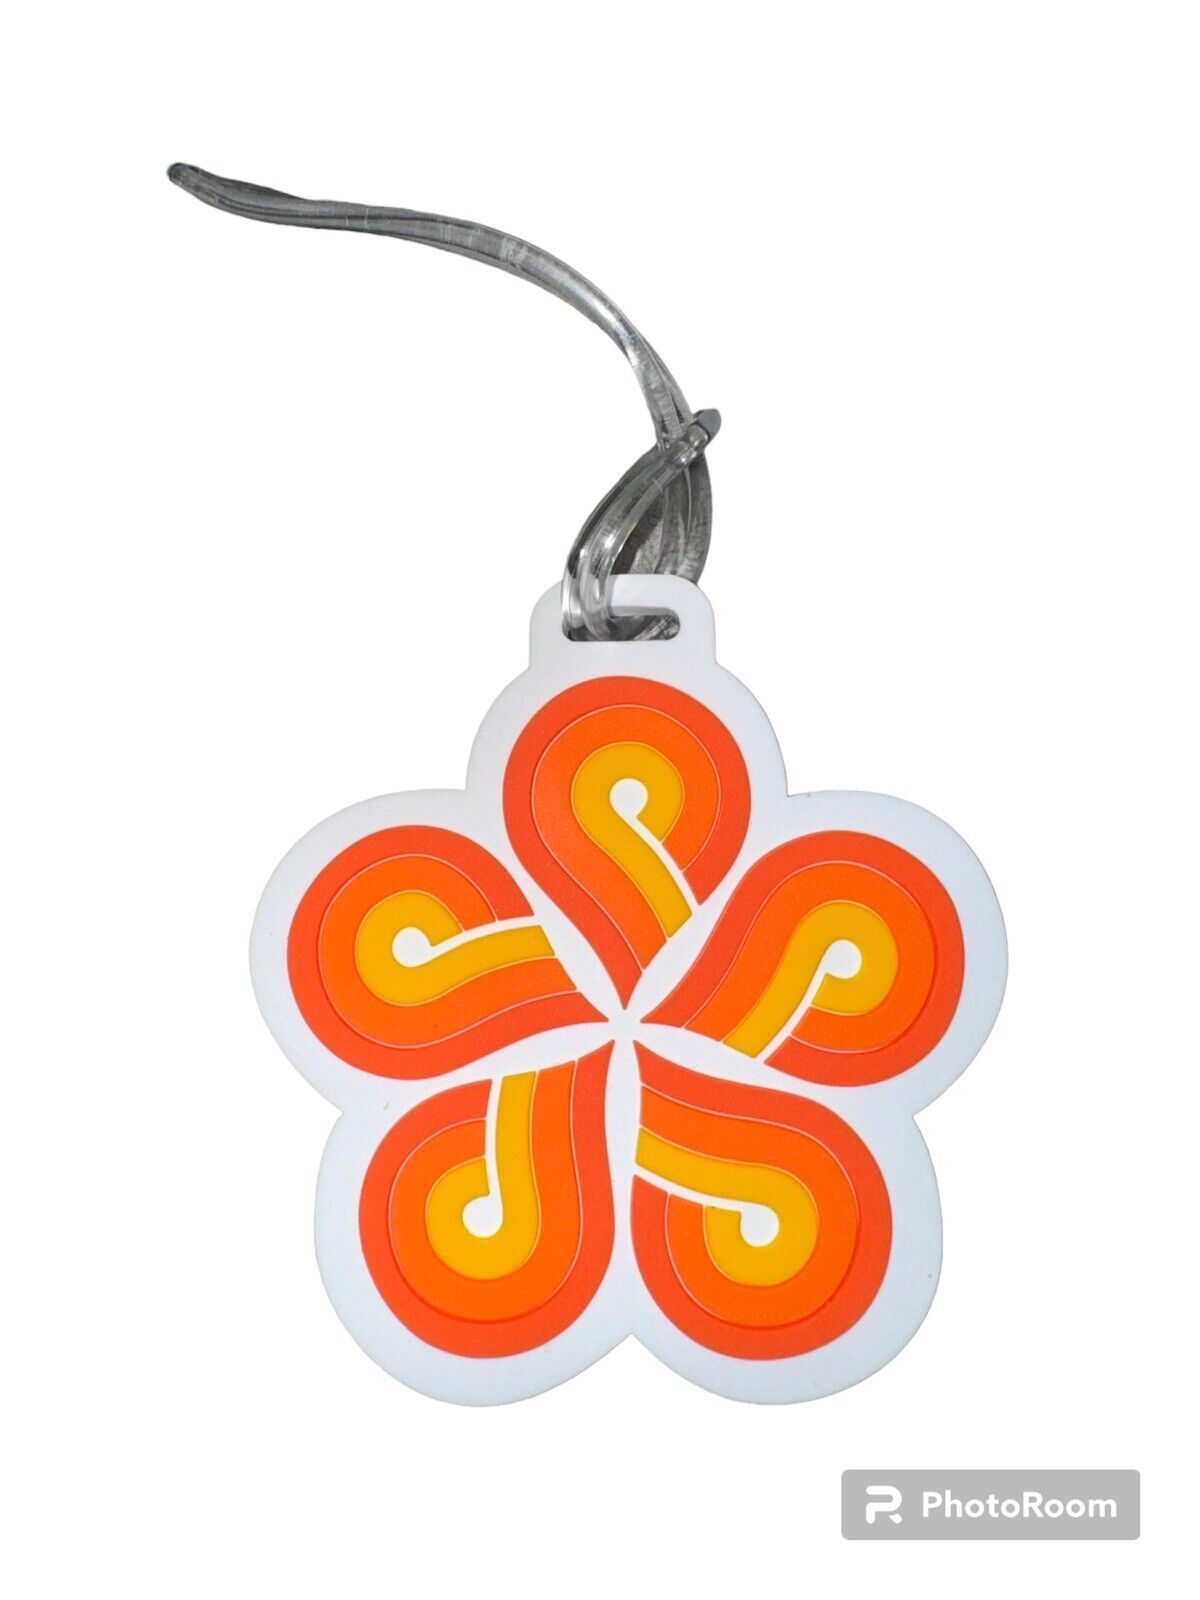 Aloha Airlines “FLOWER POWER” Luggage Tag